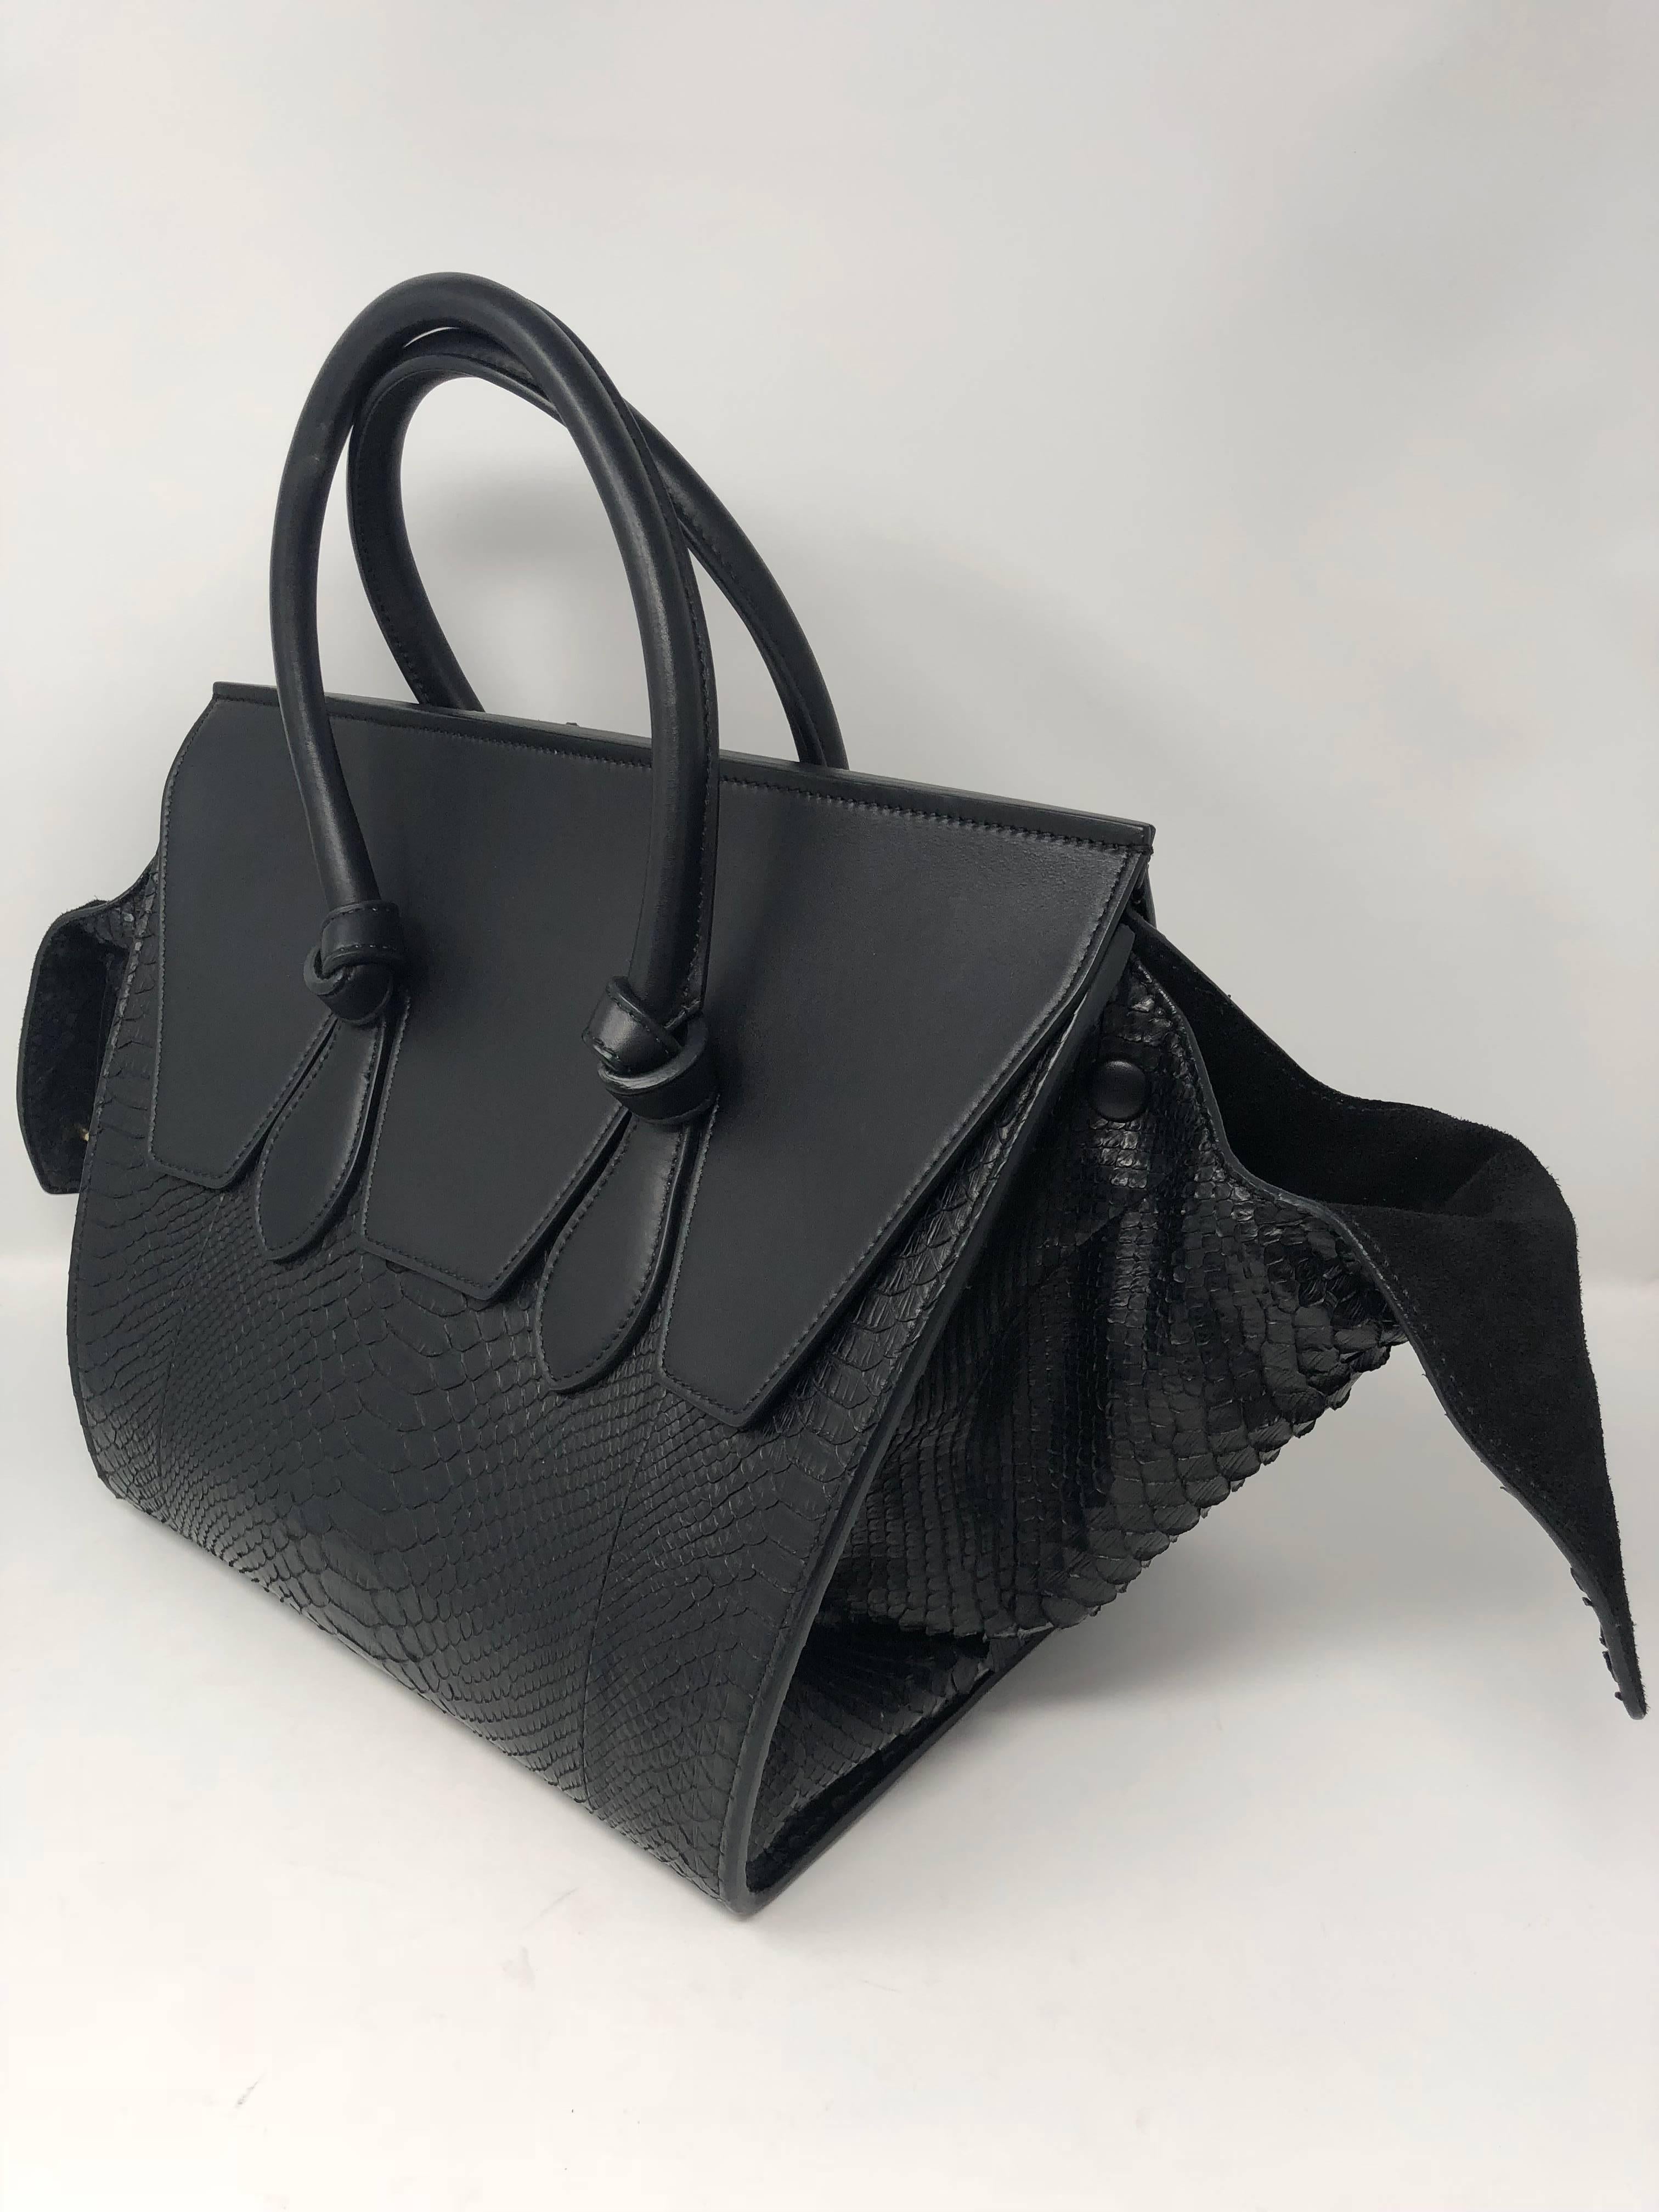 Black Celine Tie Tote in Python leather. Great condition and durable bag. Sides can be tucked in or worn loose. Highly coveted and nice structured purse. 